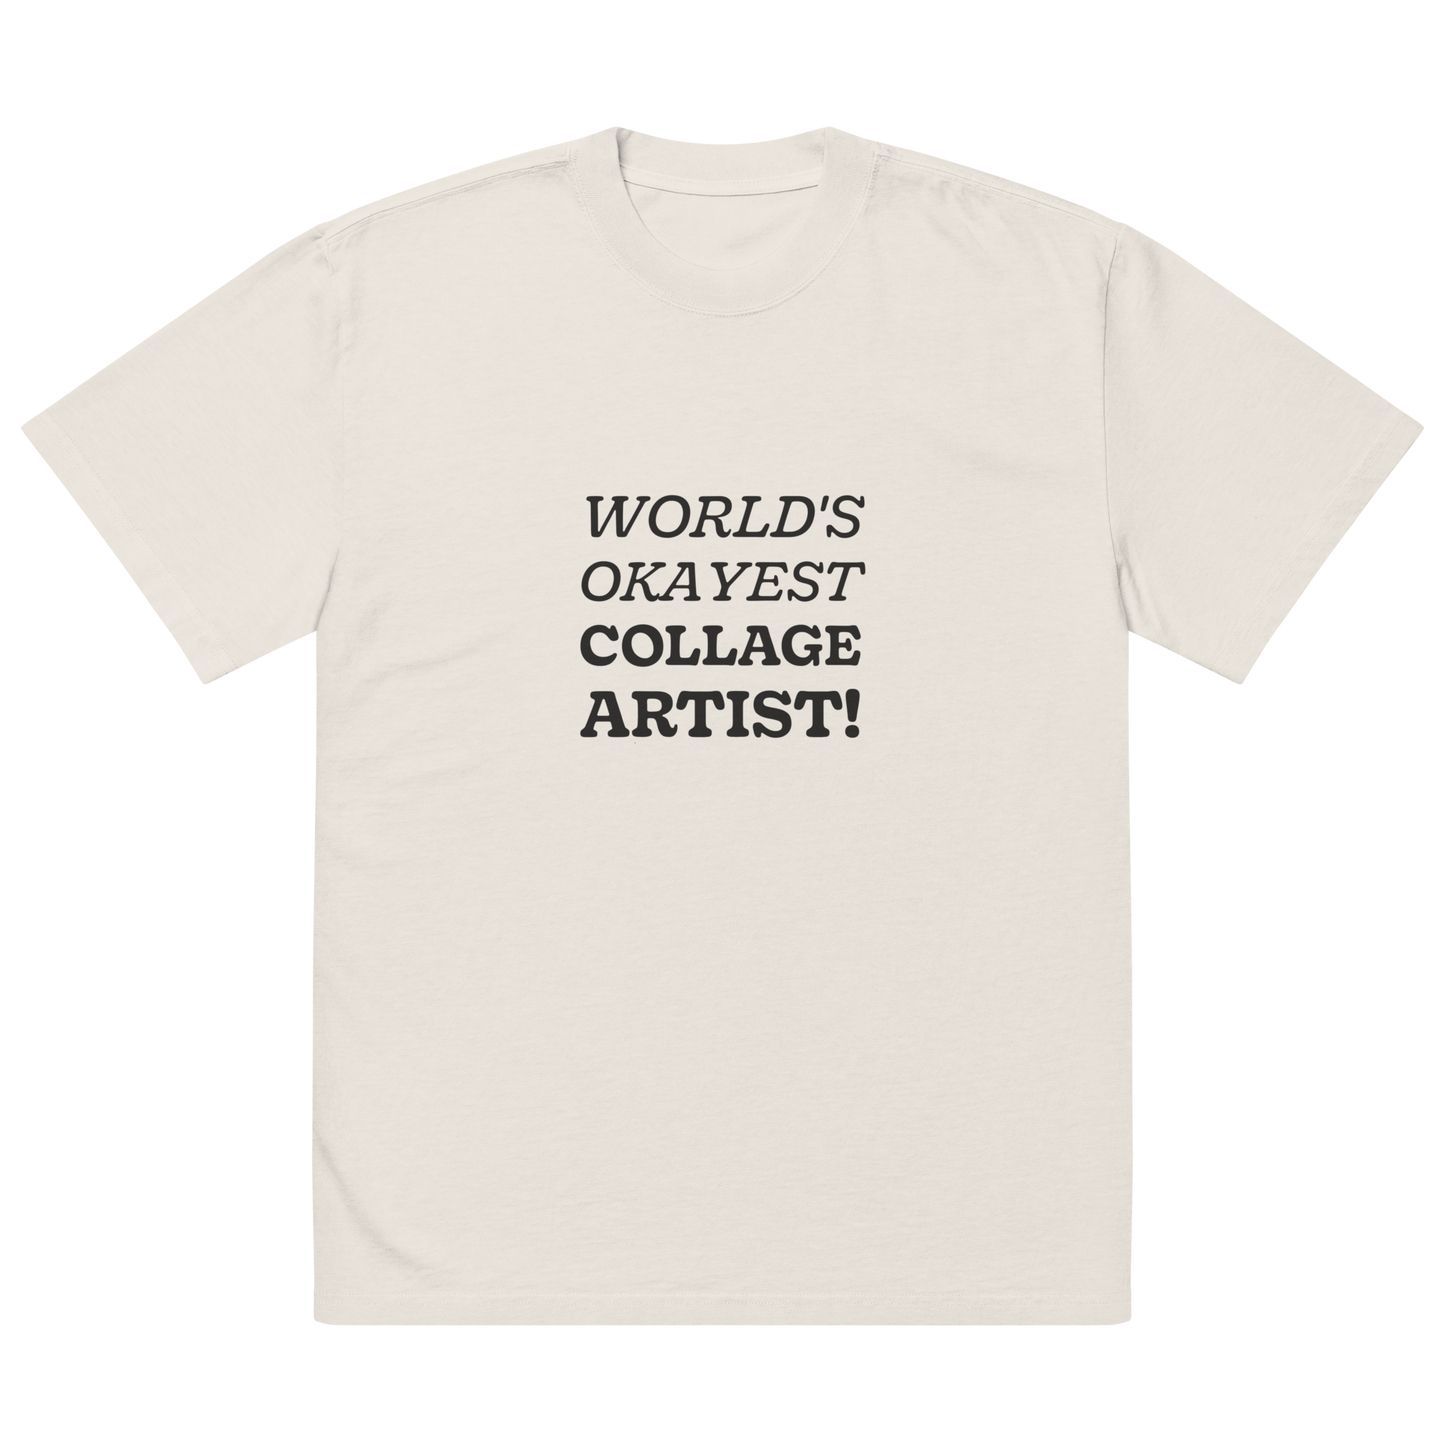 World's okayest collage artist! Oversized faded t-shirt